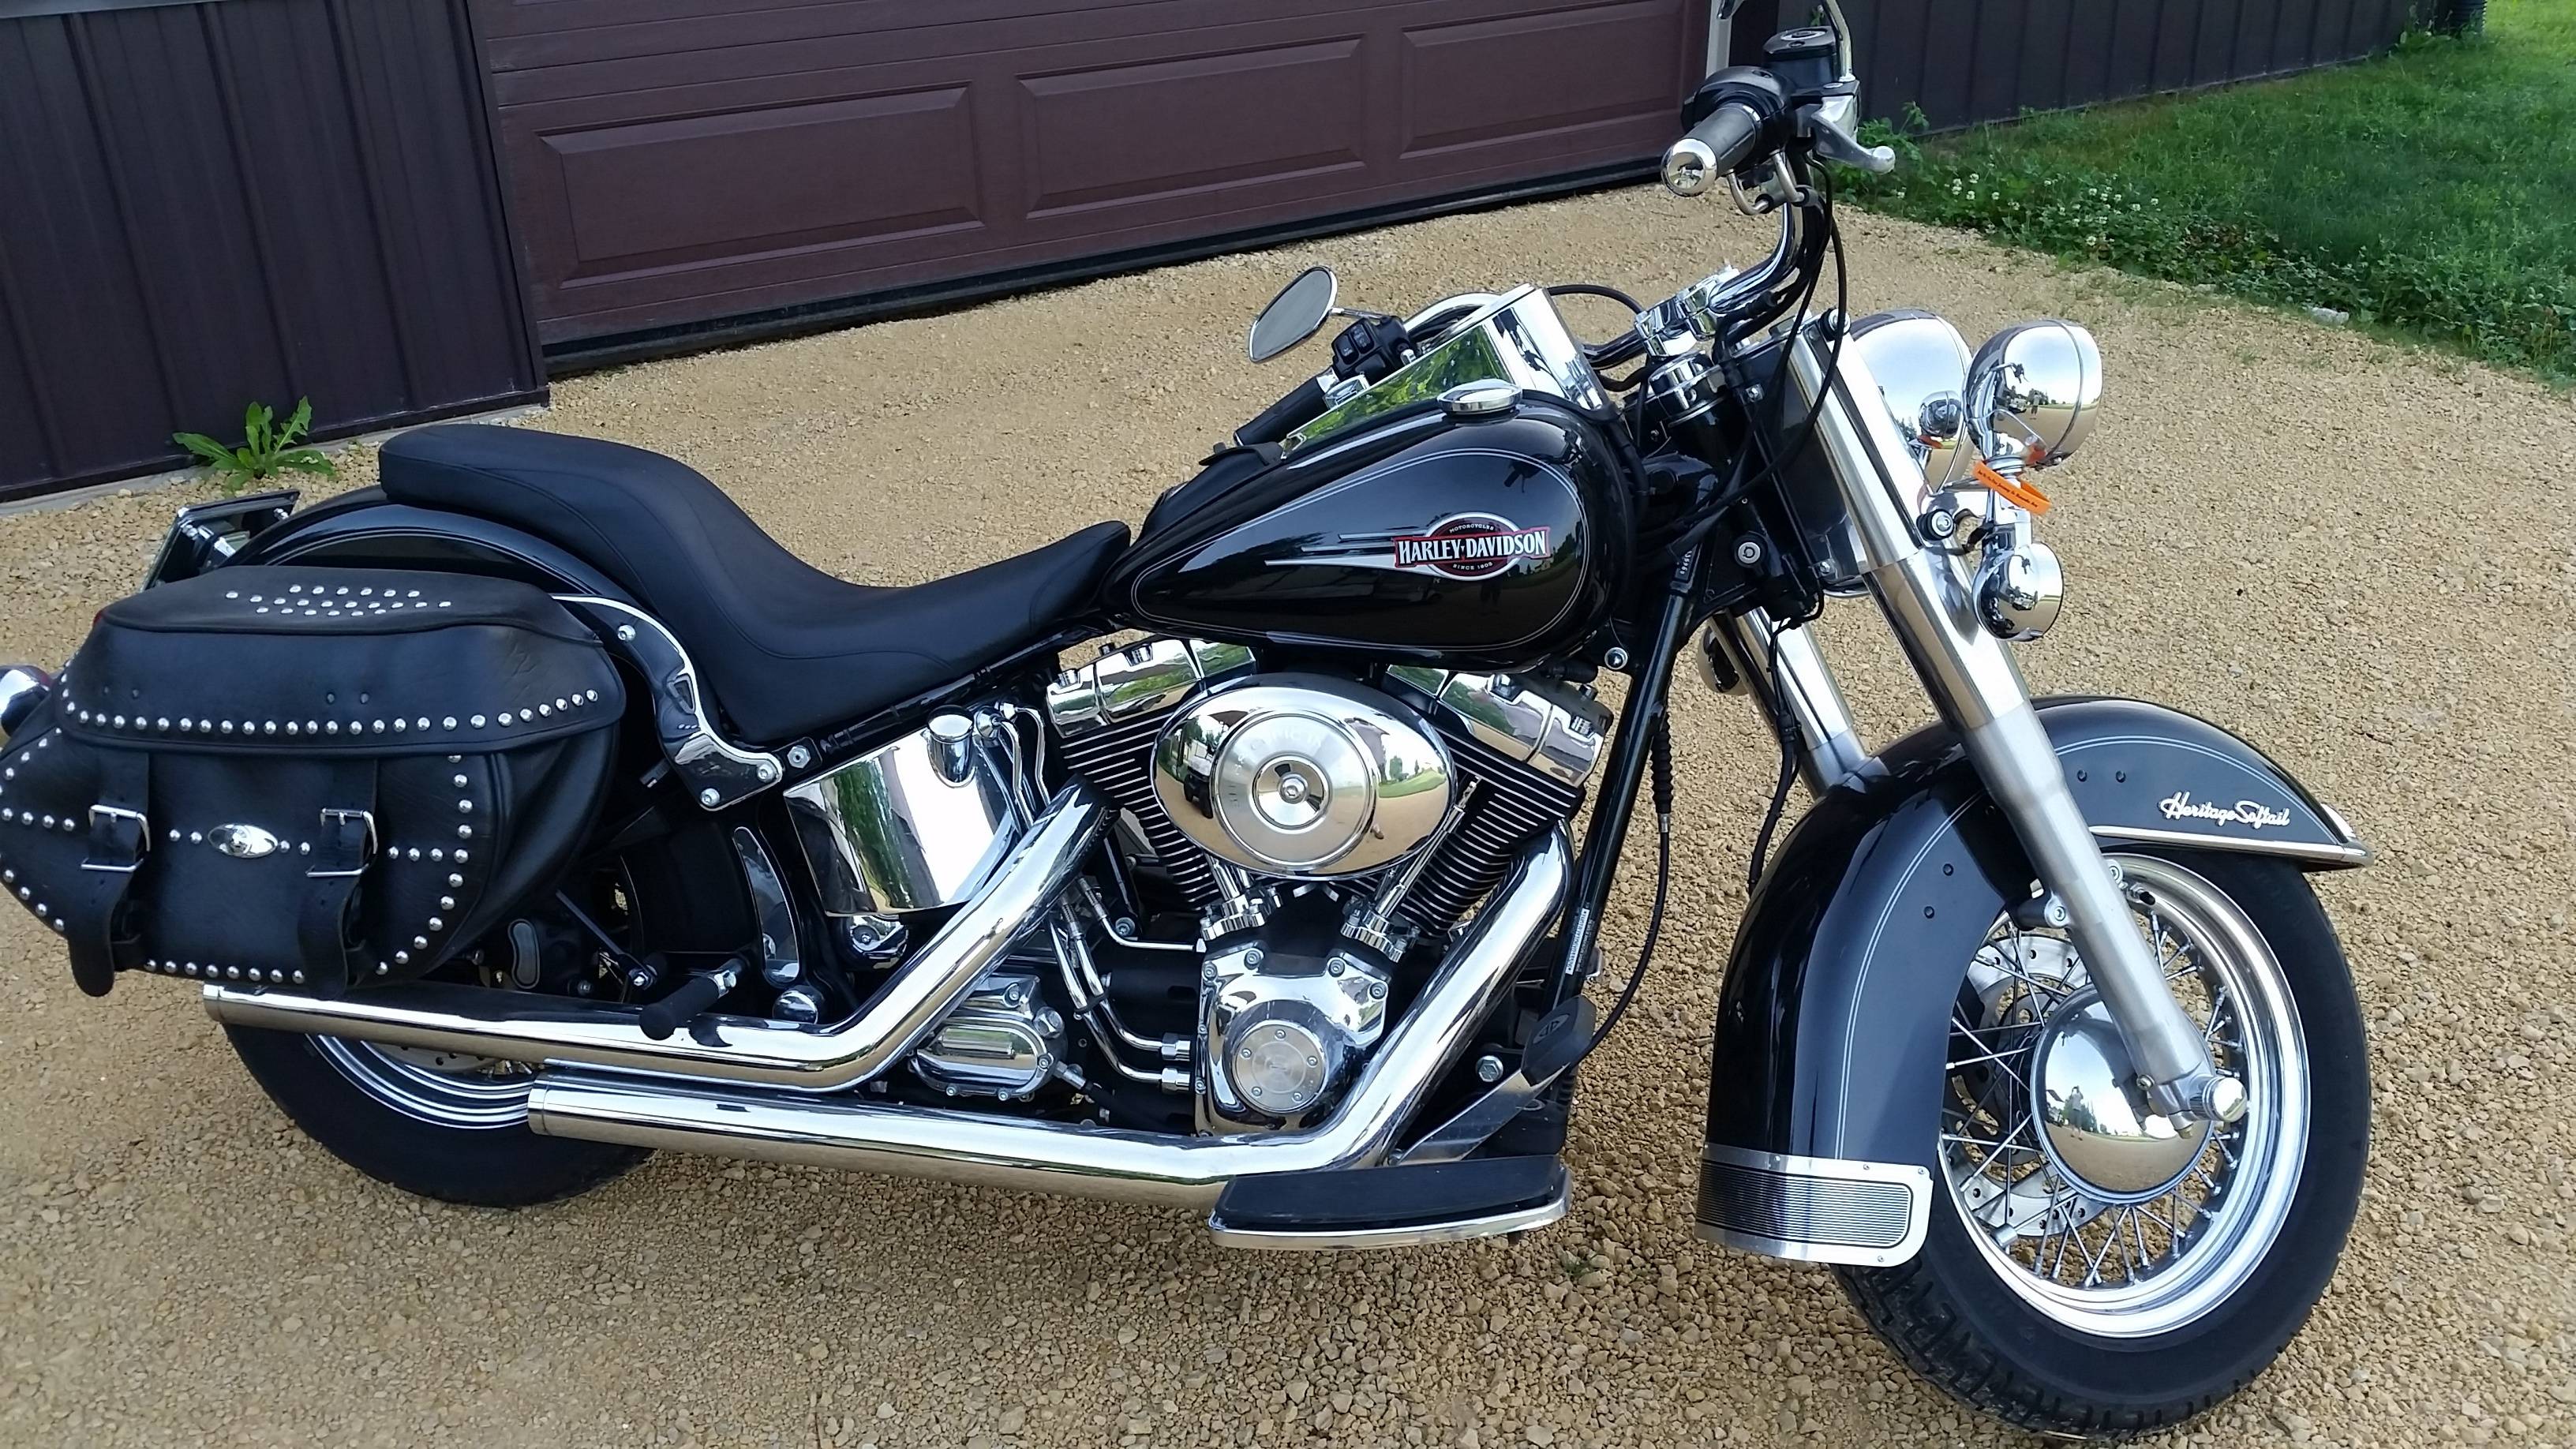 For Sale 2006 Harley Davidson Heritage Softail Classic Low Miles Black And Carburetor Not Fuel Injected For A Bodies Only Mopar Forum